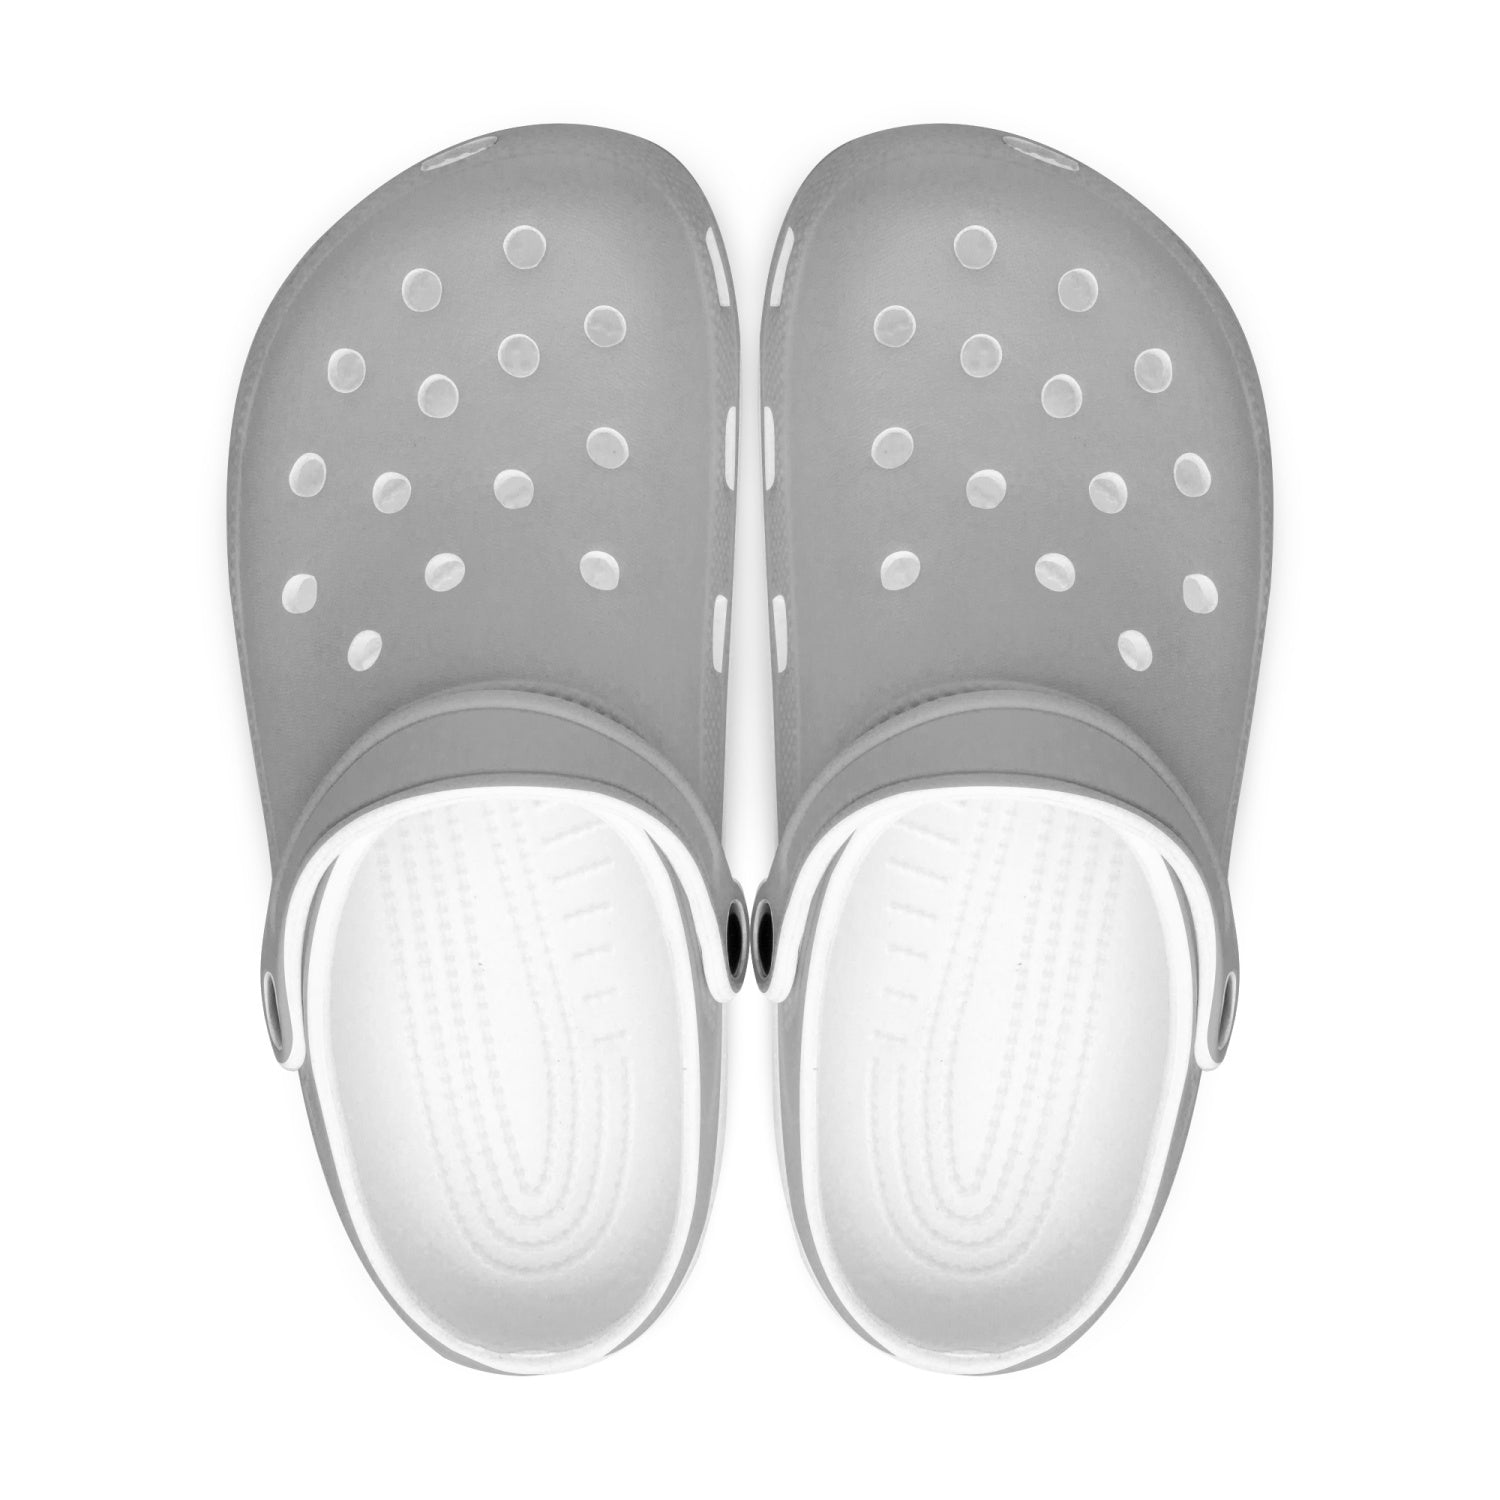 Ash Grey Color Unisex Clogs, Best Solid Grey Color Classic Solid Color Printed Adult's Lightweight Anti-Slip Unisex Extra Comfy Soft Breathable Supportive Clogs Flip Flop Pool Water Beach Slippers Sandals Shoes For Men or Women, Men's US Size: 3.5-12, Women's US Size: 4-12